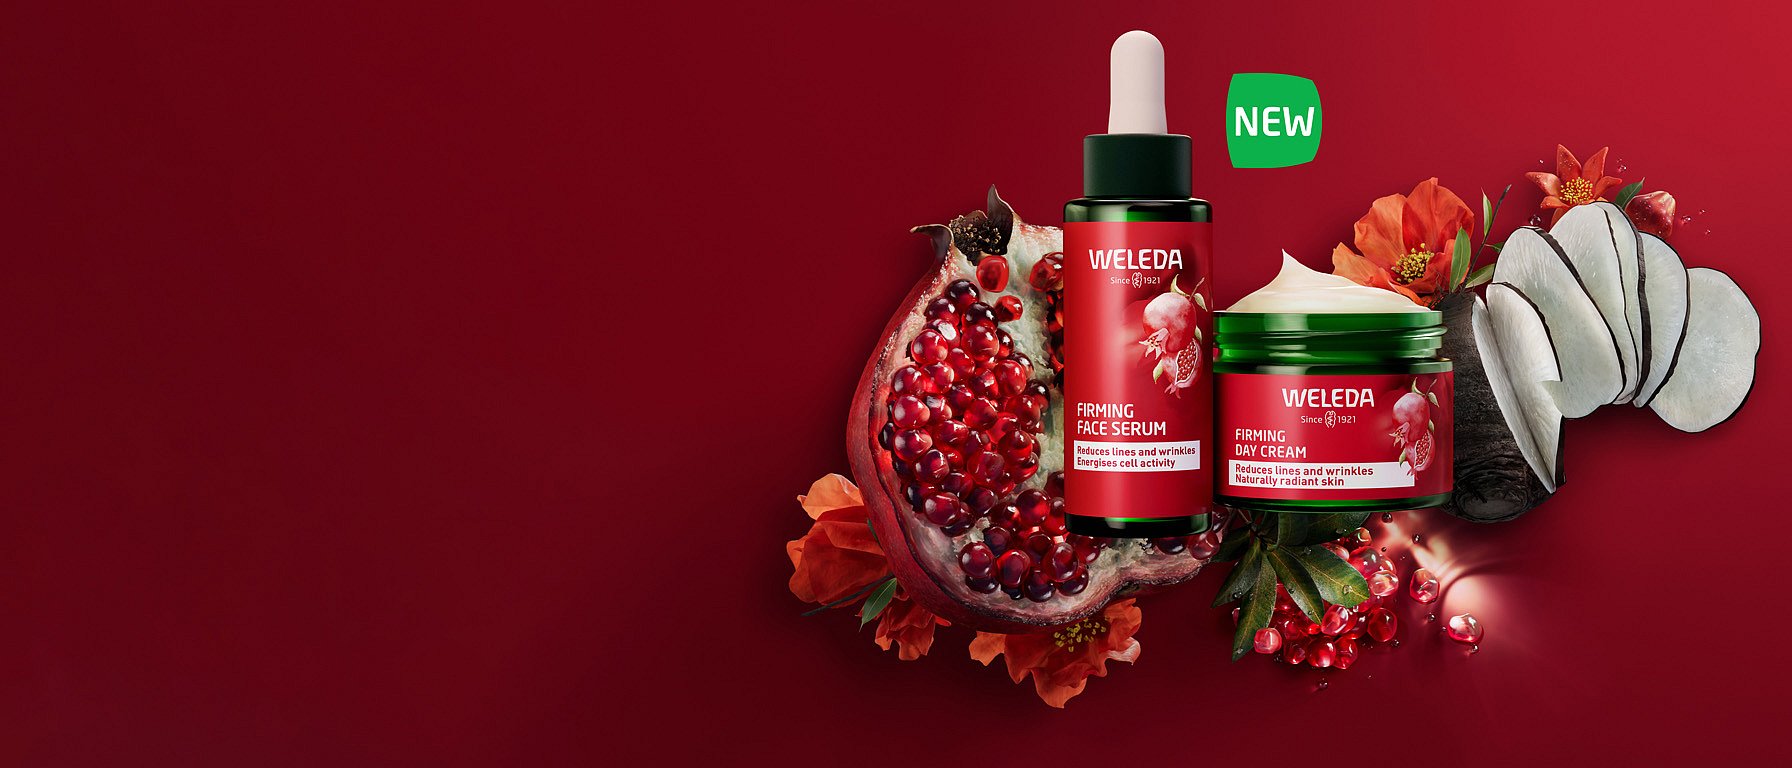 New weleda firming facial care pomegranate and maca peptides